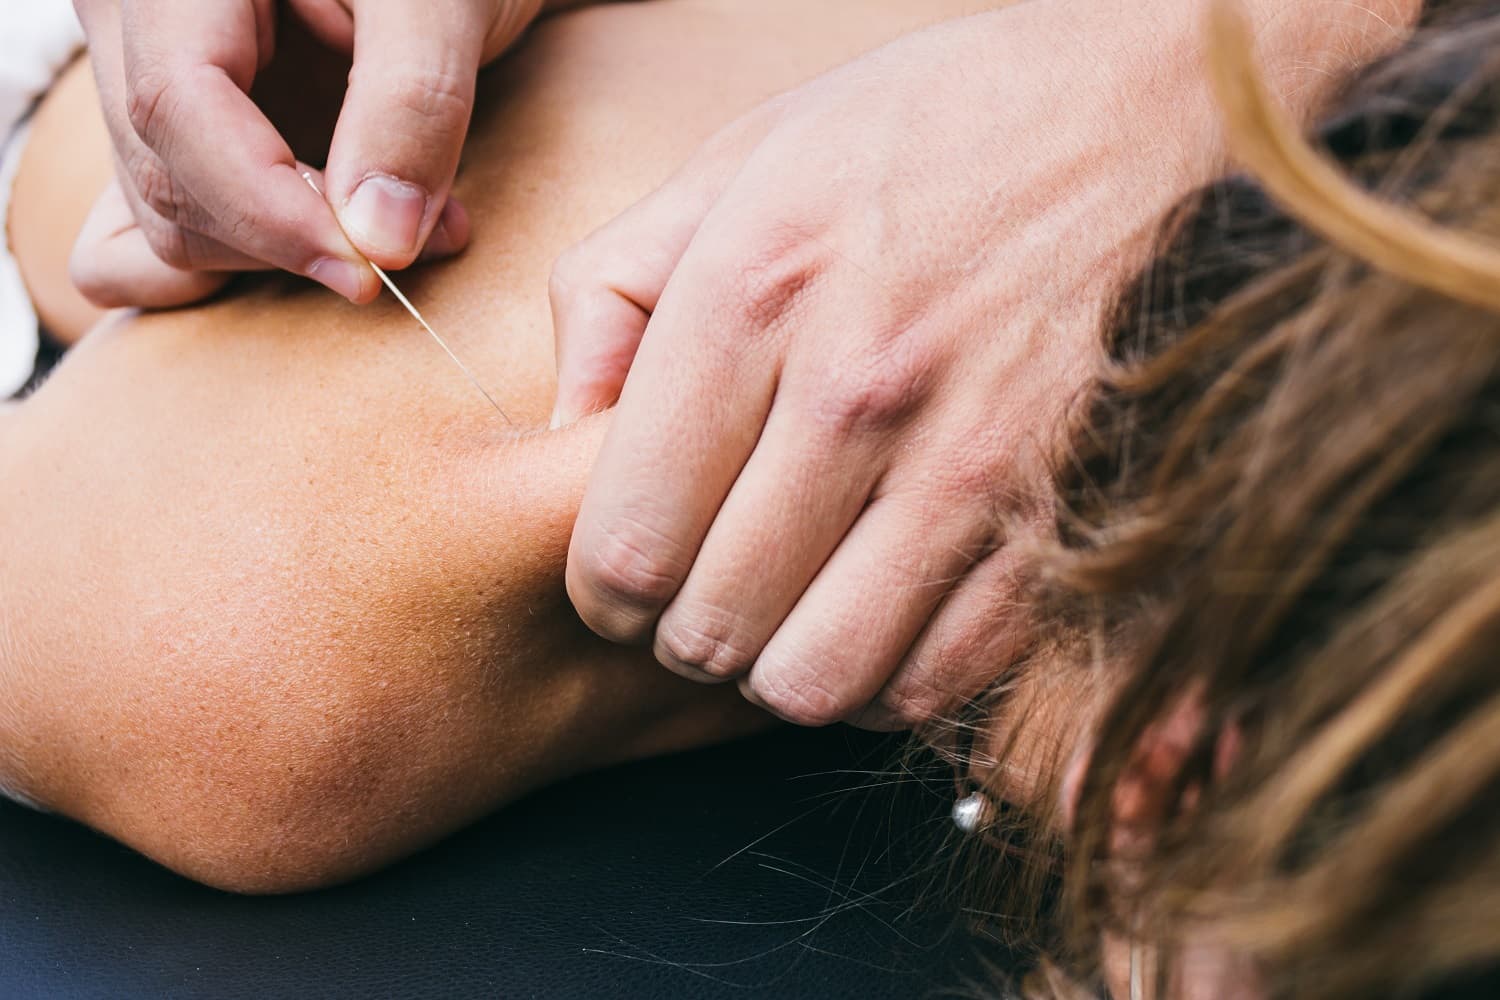 What is dry needling?